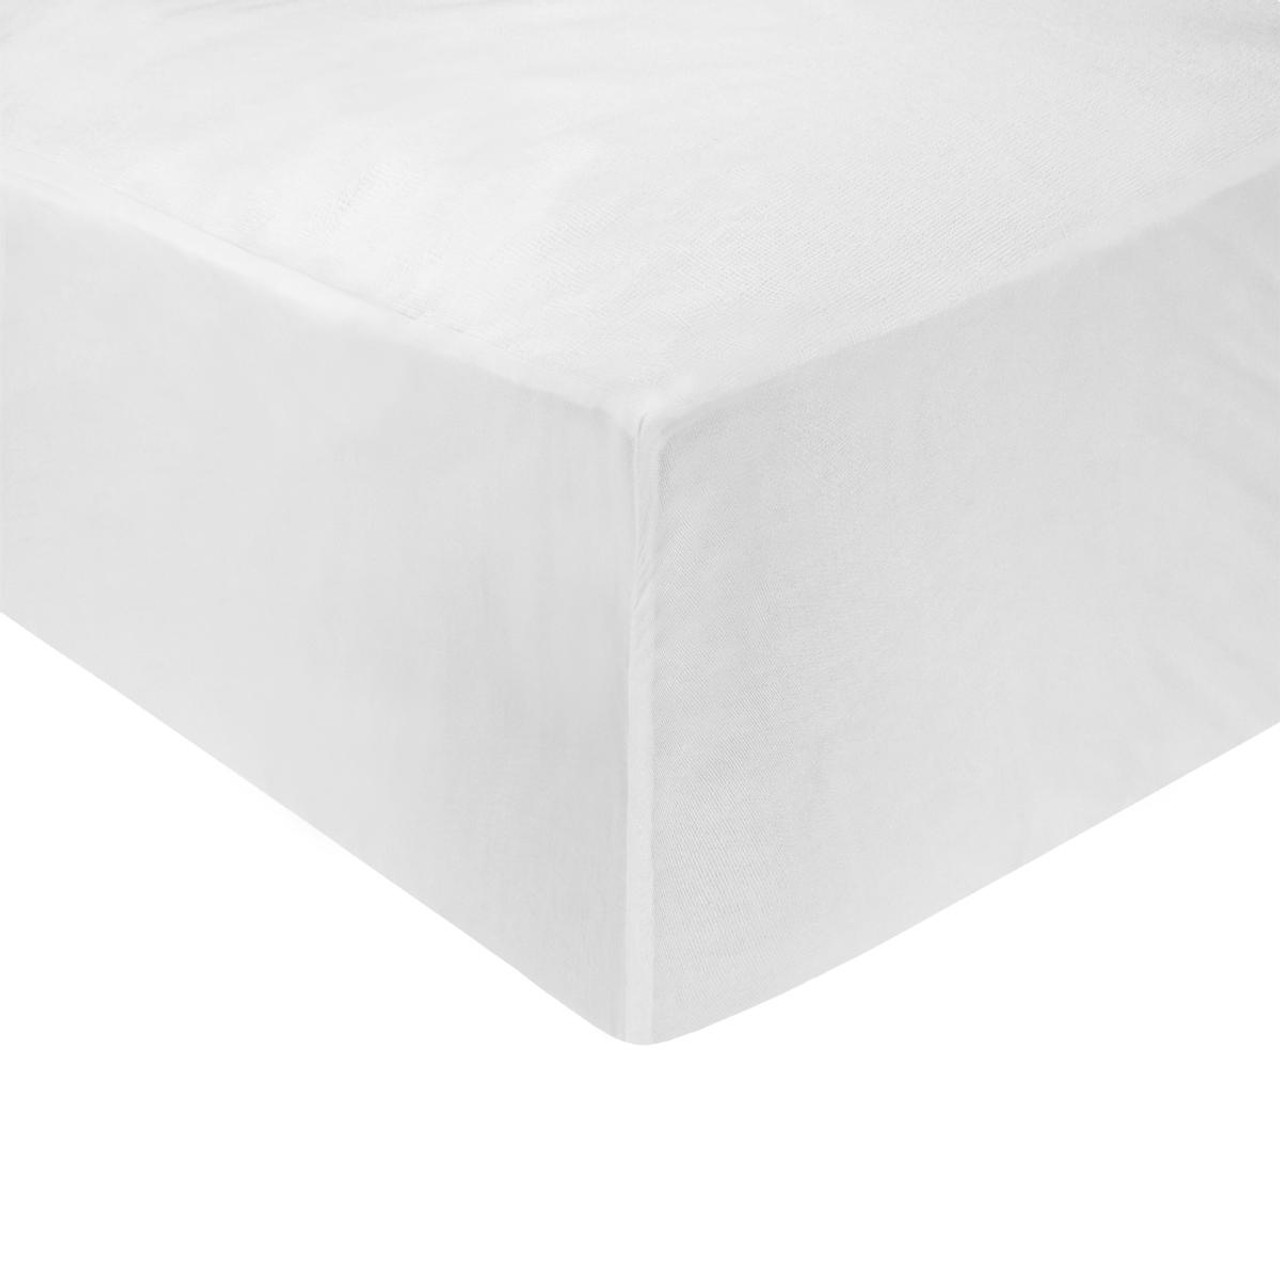 Details about   Luxury Waterproof Terry Towel Mattress Protector Mattress Topper Deep Fitted UK 